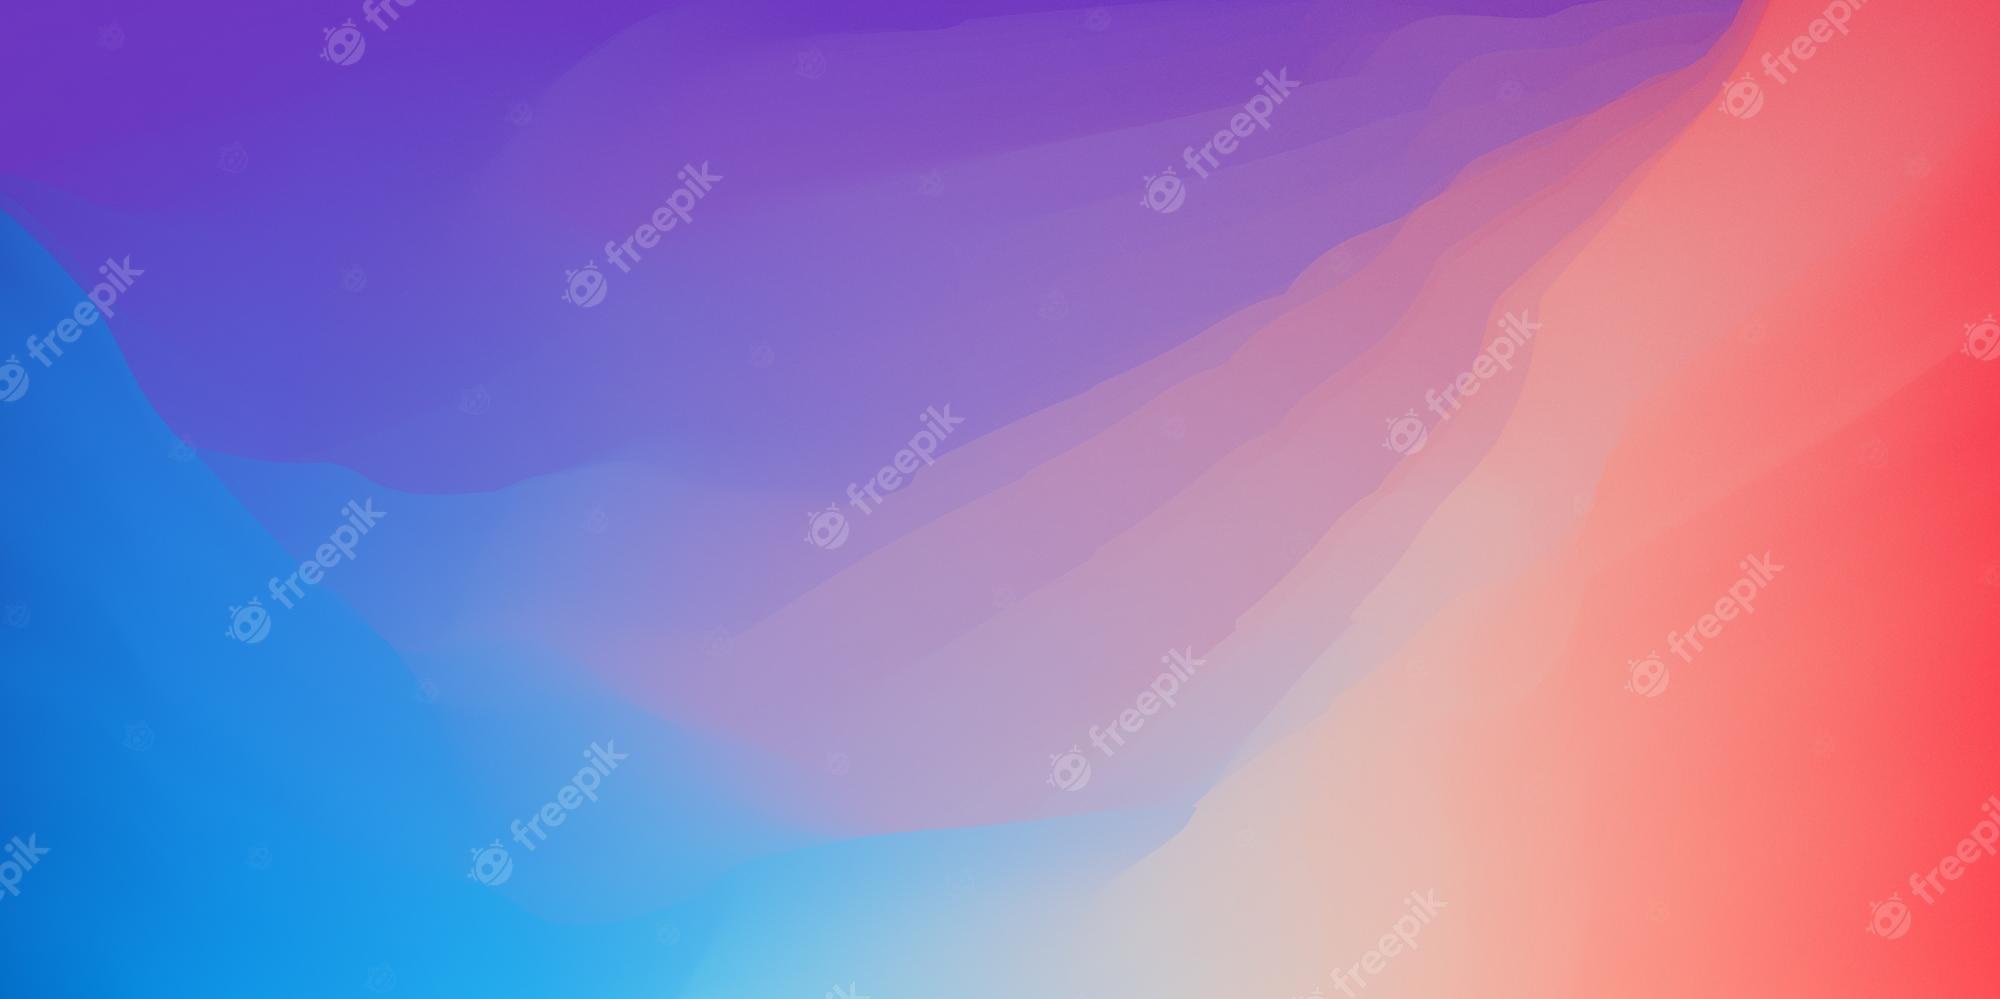 Premium Vector Colorful Blurred Gradients Abstract Background